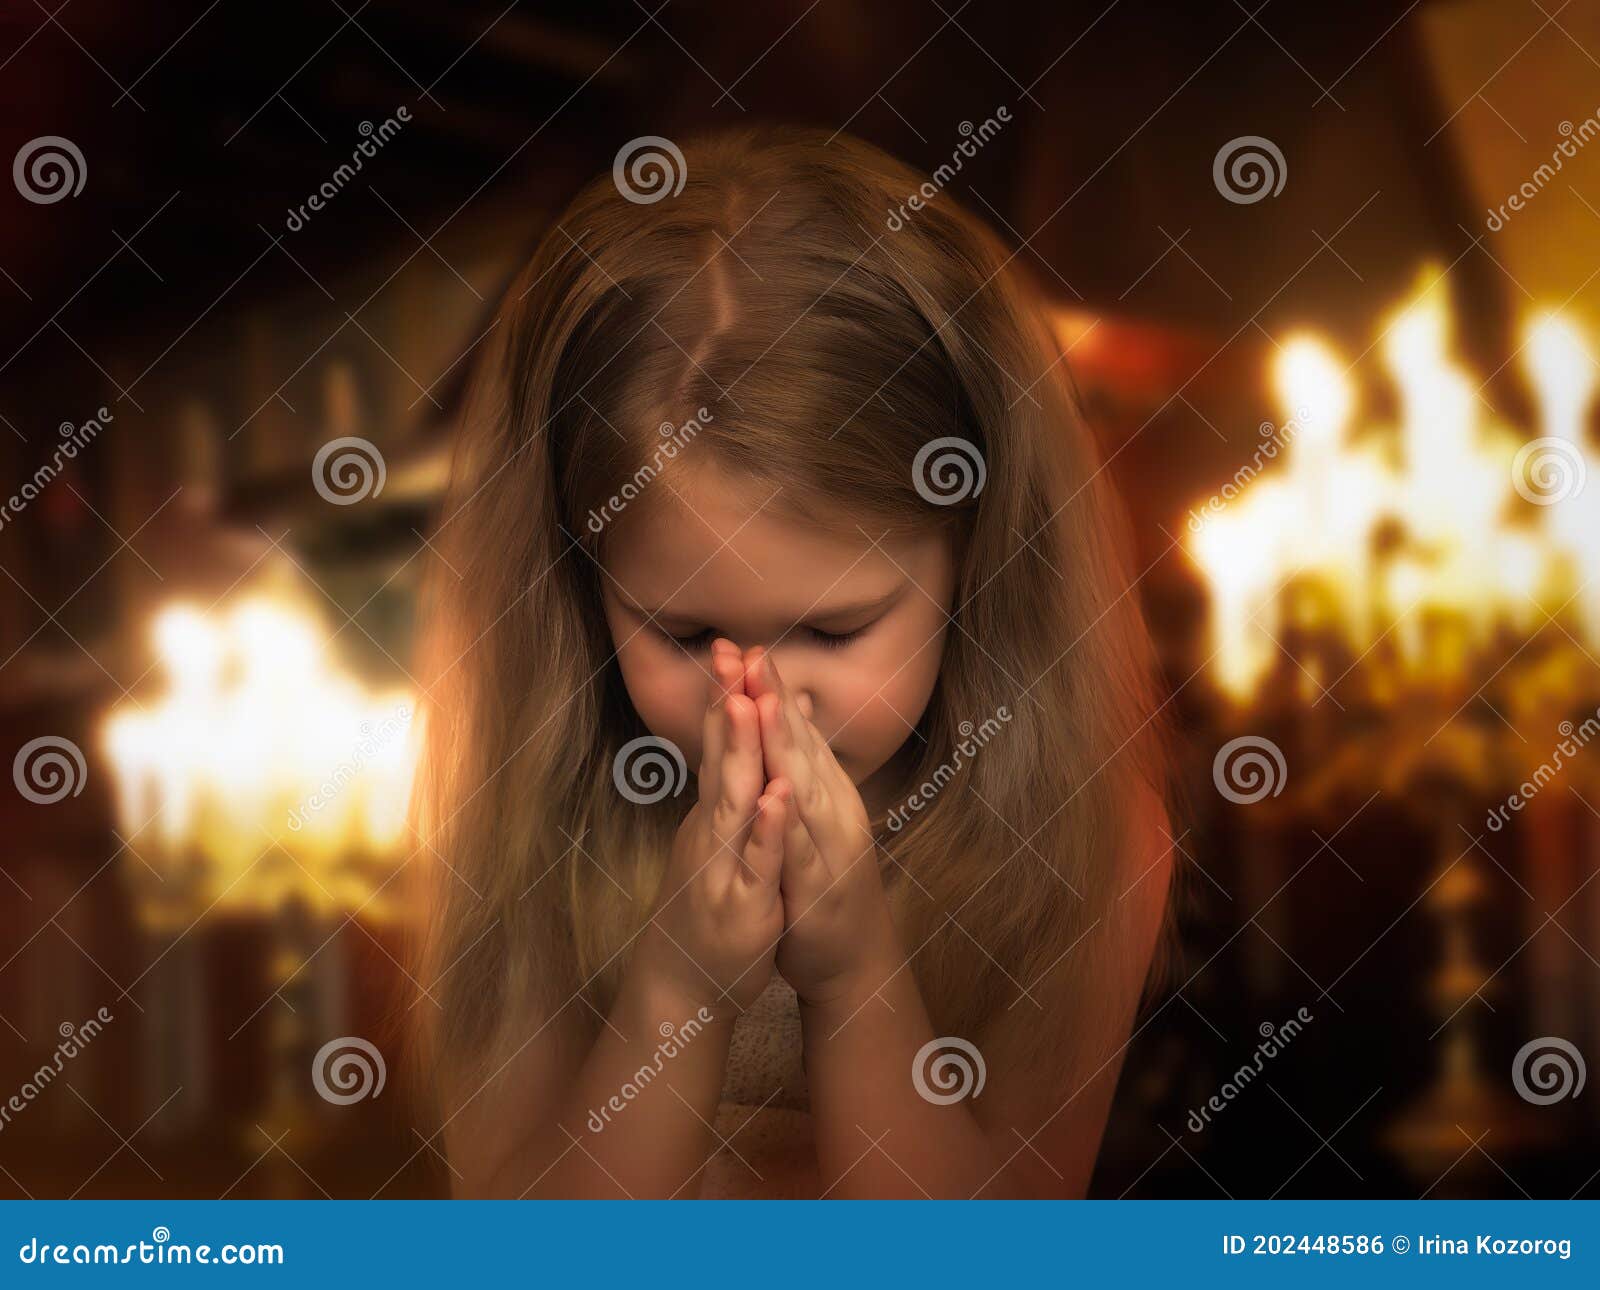 girl folded her hands in a prayerful gesture. child praying in the temple